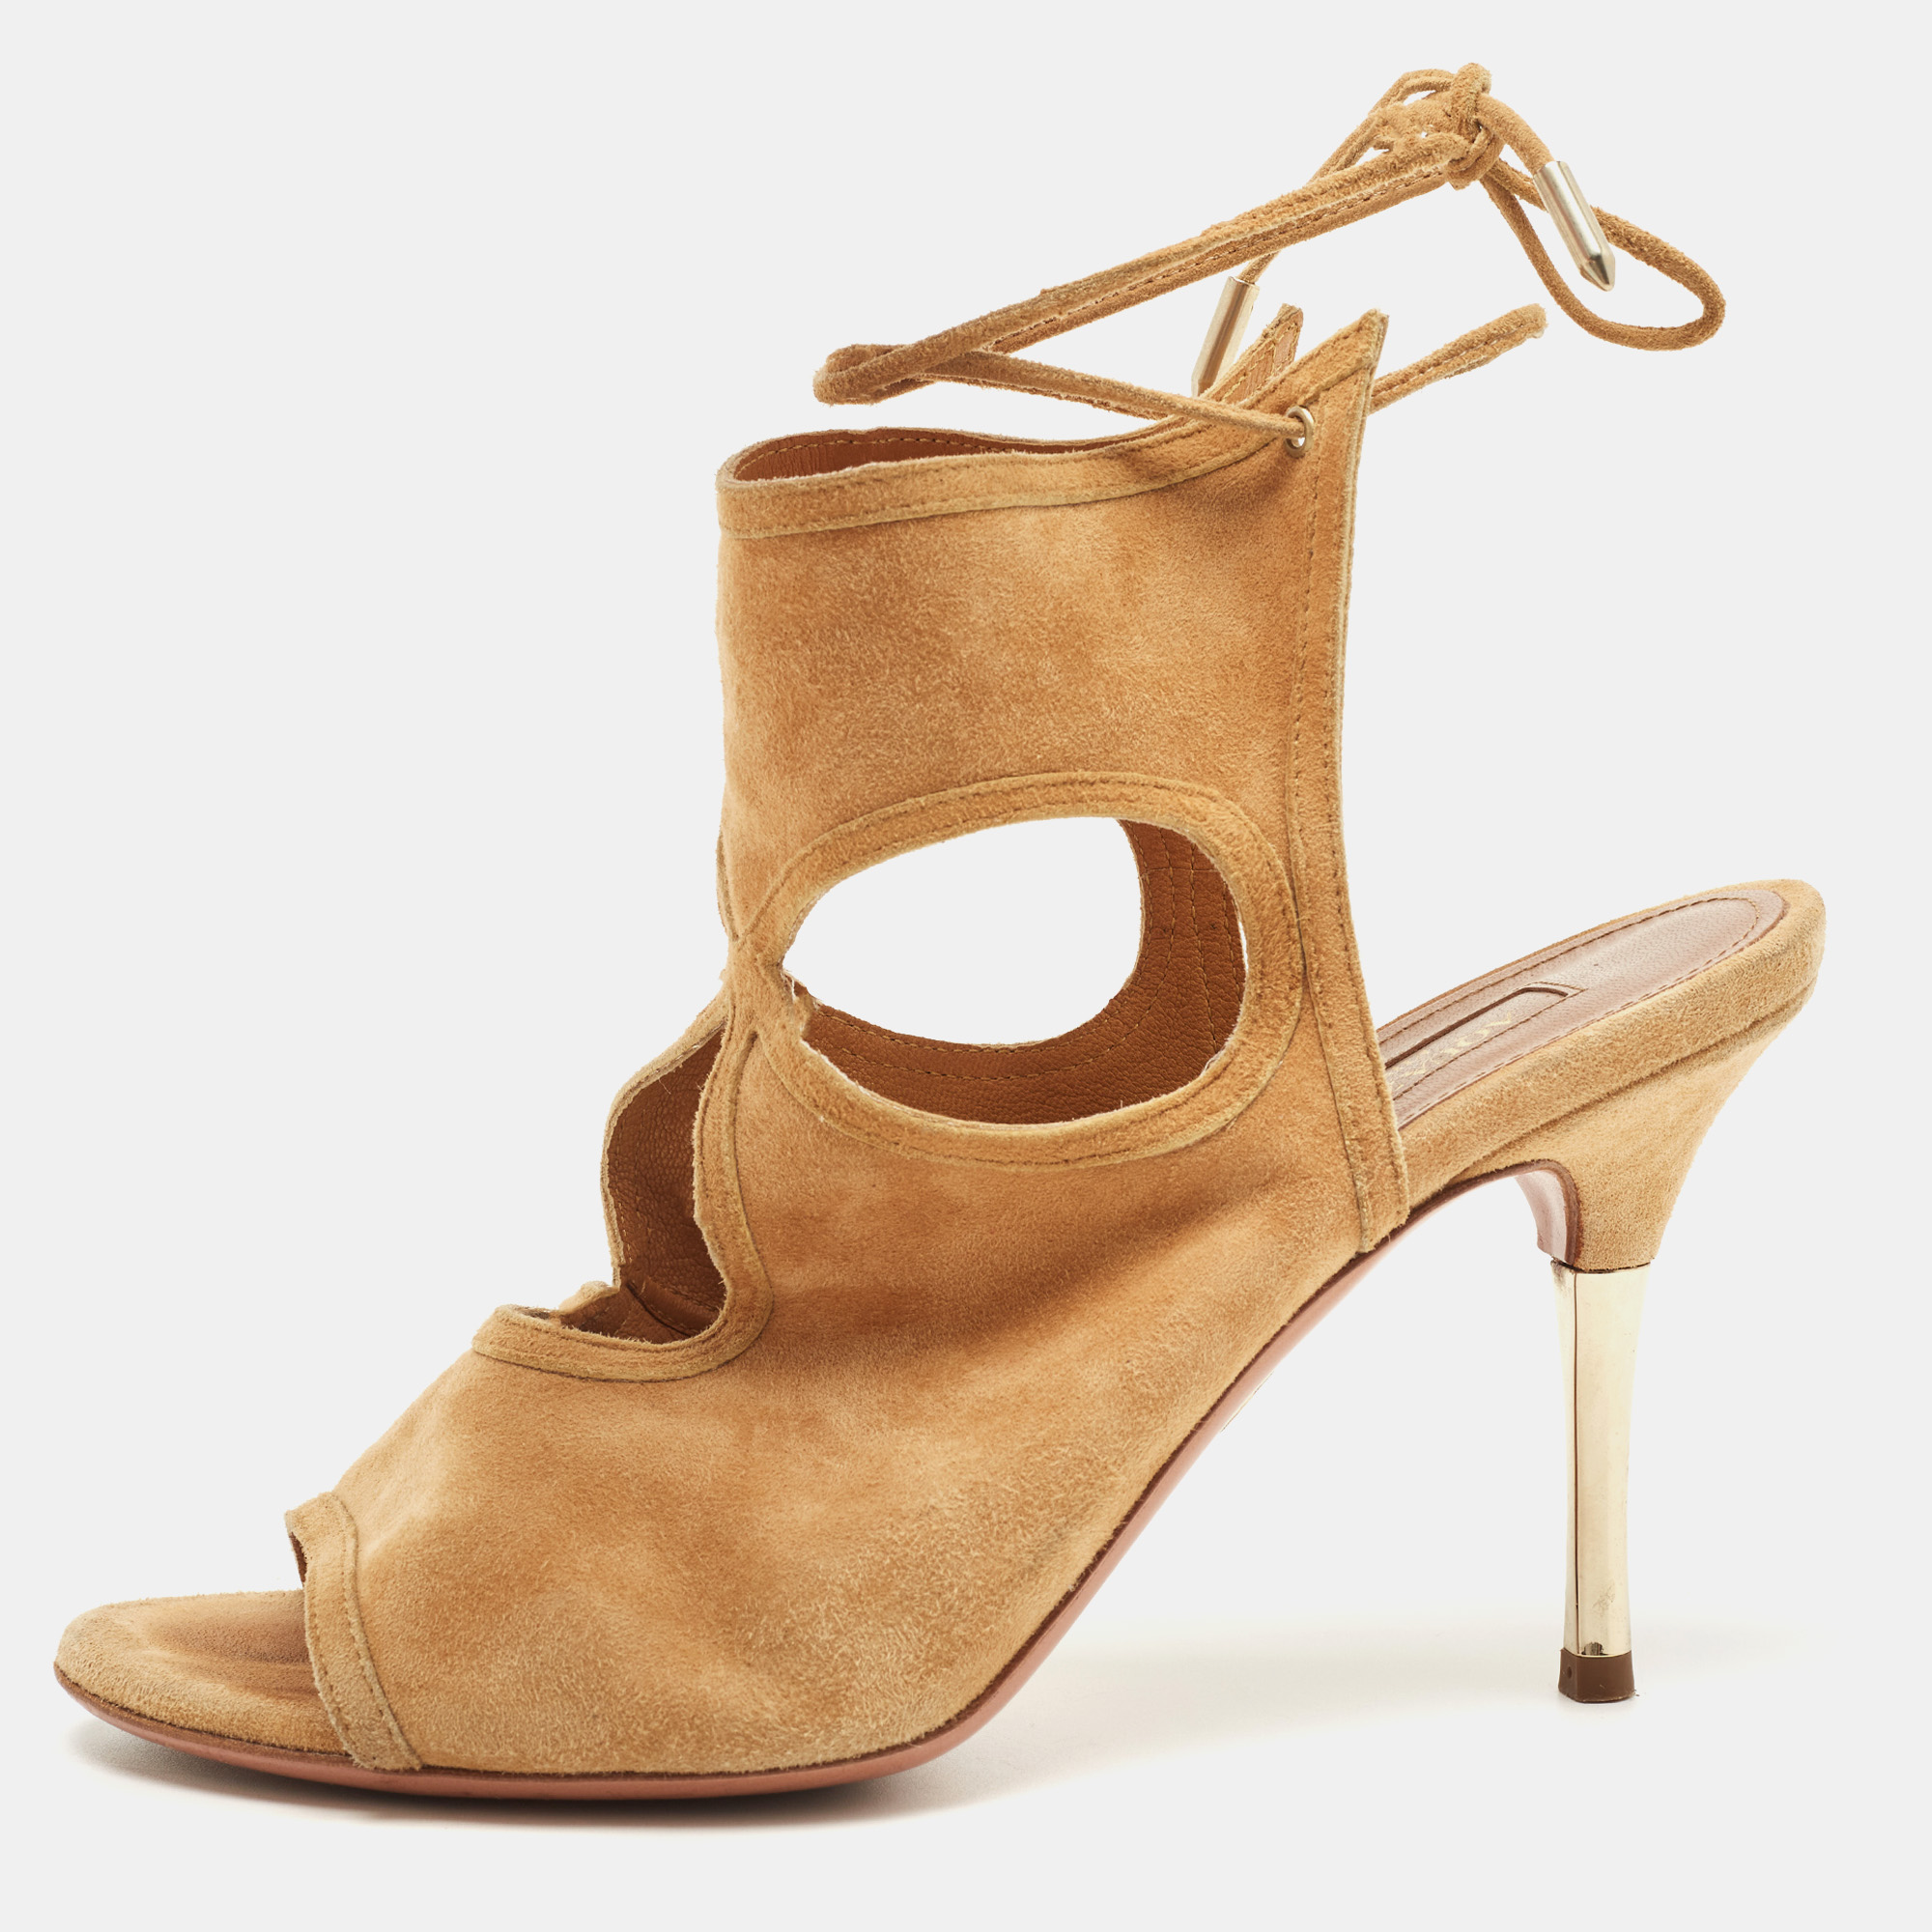 Pre-owned Aquazzura Beige Suede Sexy Thing Sandals Size 37